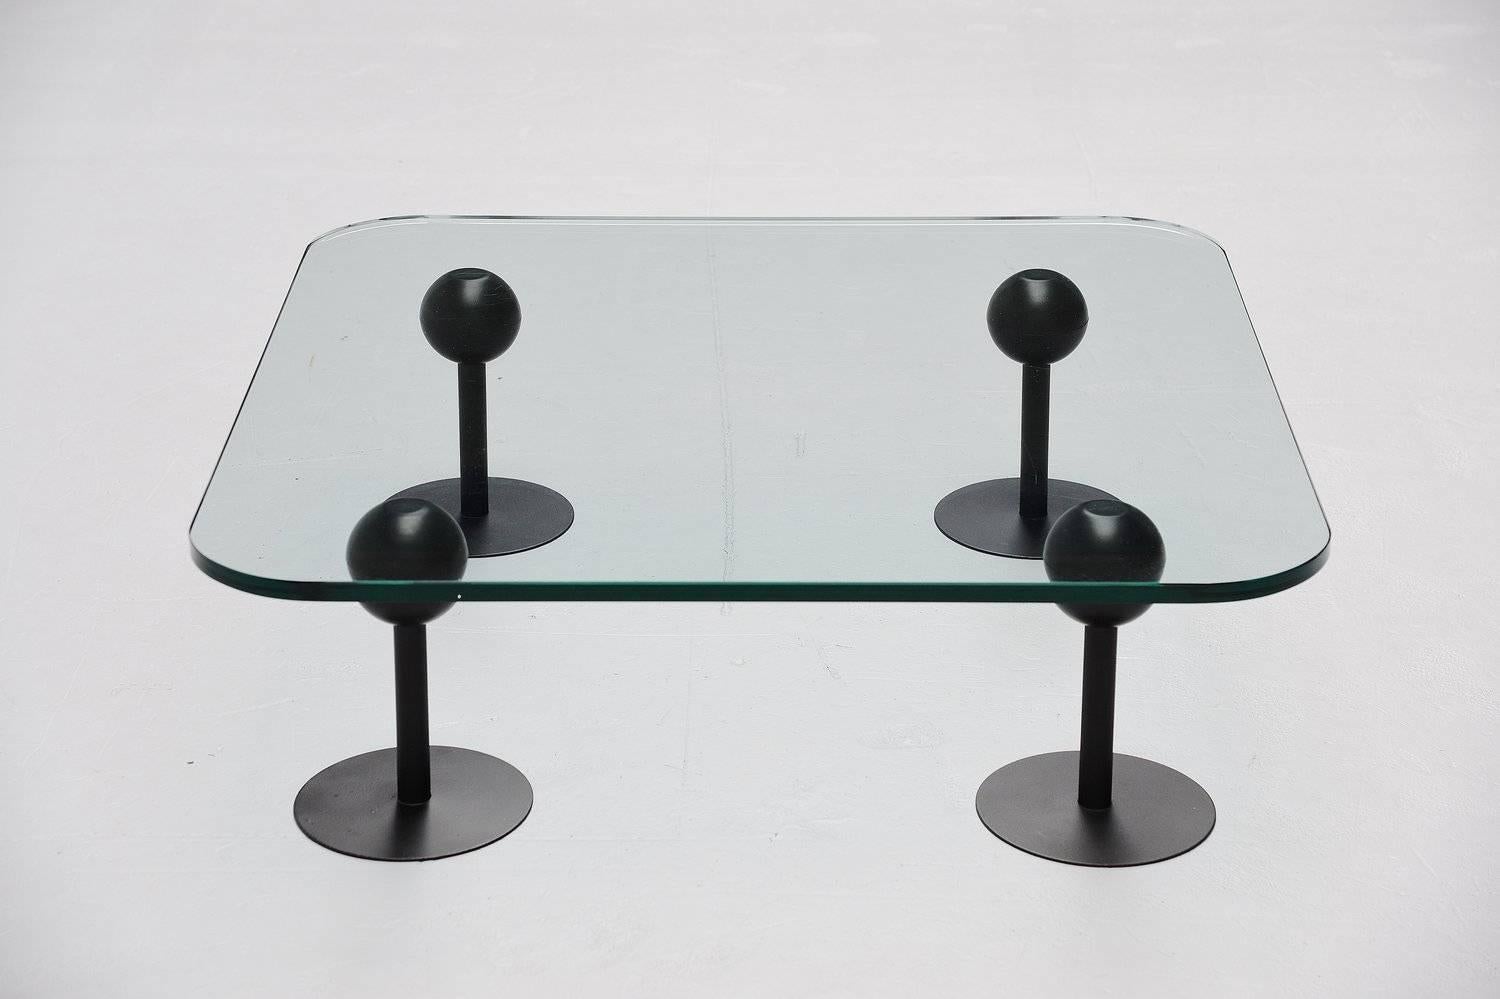 Collectible coffee table designed by Philippe Starck for Les Trois Suisses, France, 1982. This table exist from four black bases with rubber balls on top supporting a thick glass top. Very nice modernist shaped table. The glass is in very good